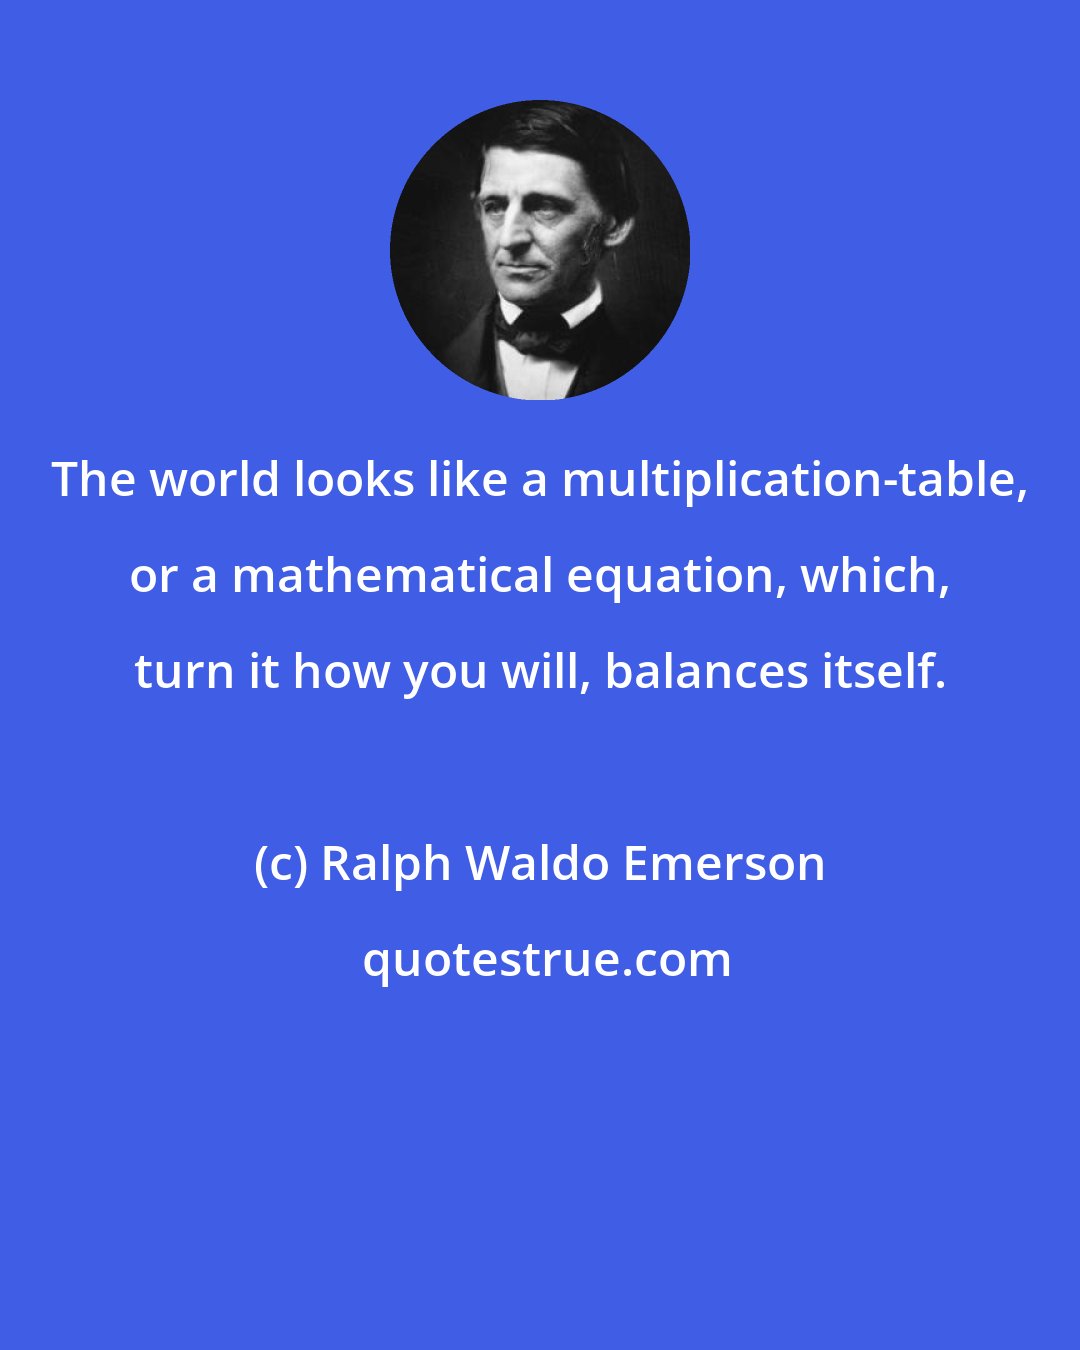 Ralph Waldo Emerson: The world looks like a multiplication-table, or a mathematical equation, which, turn it how you will, balances itself.